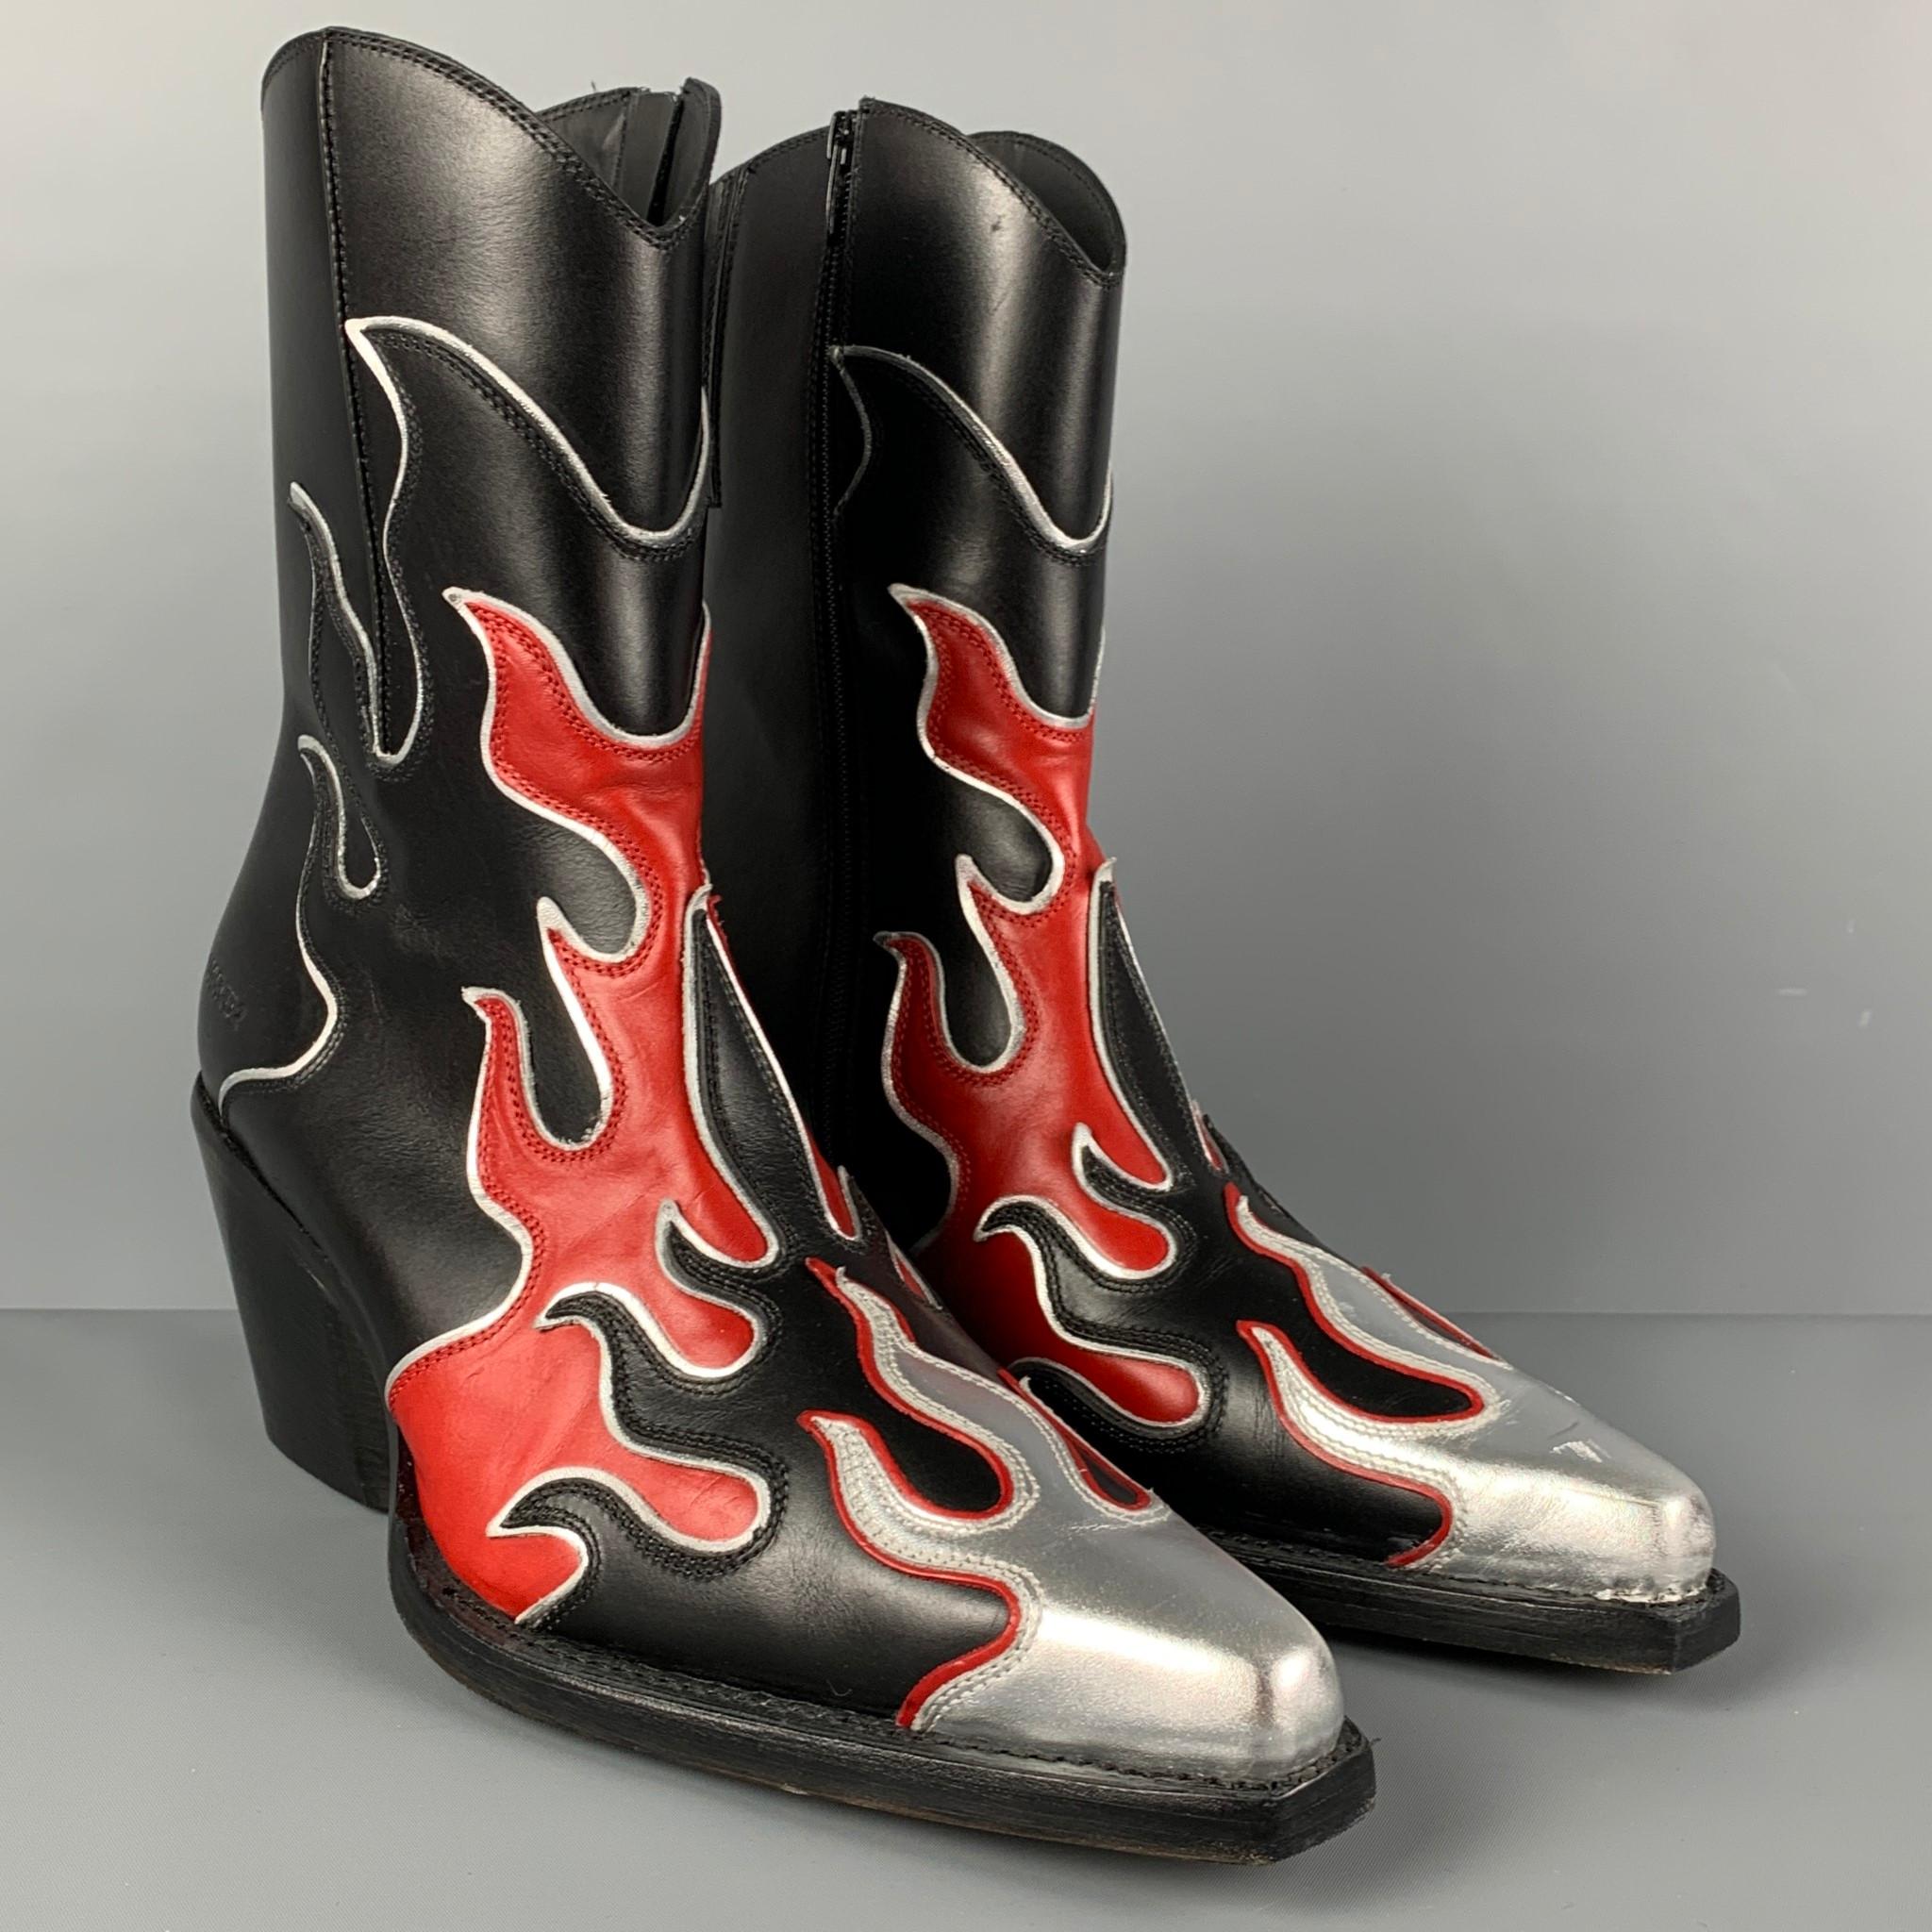 DSQUARED2 ankle boots comes in a black & red leather featuring a flame applique design, cowboy style, chunky heel, and a side zipper closure. Made in Italy. 

Excellent Pre-Owned Condition.
Marked: 44
Original Retail Price: